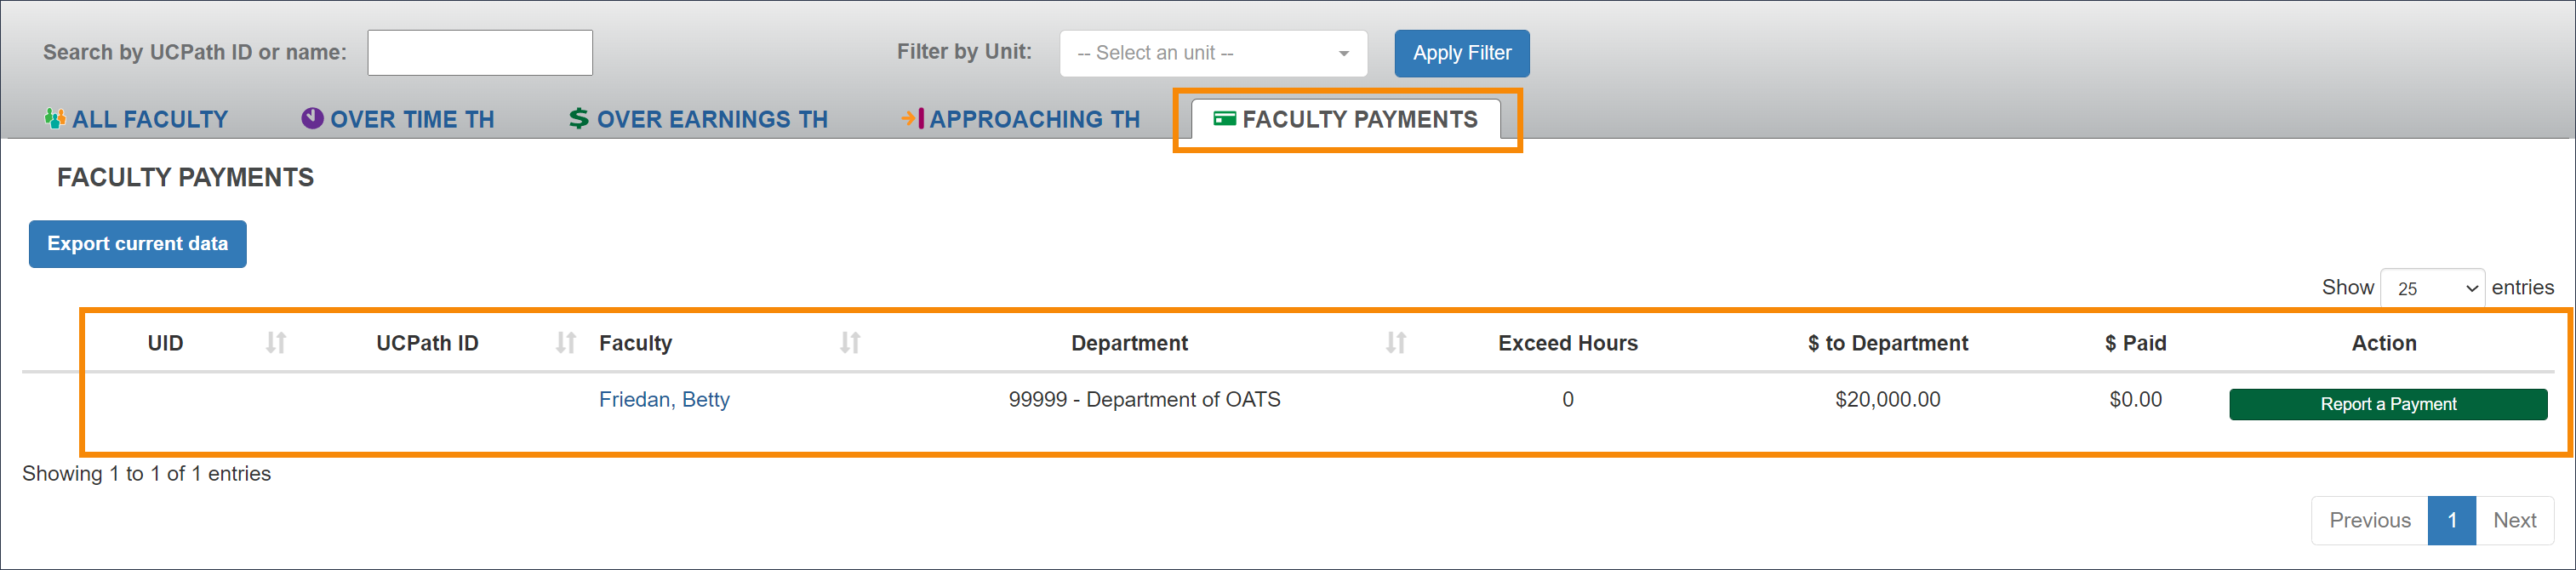 faculty payments tab that shows documented payments made to the Health Sciences Compensation Plan